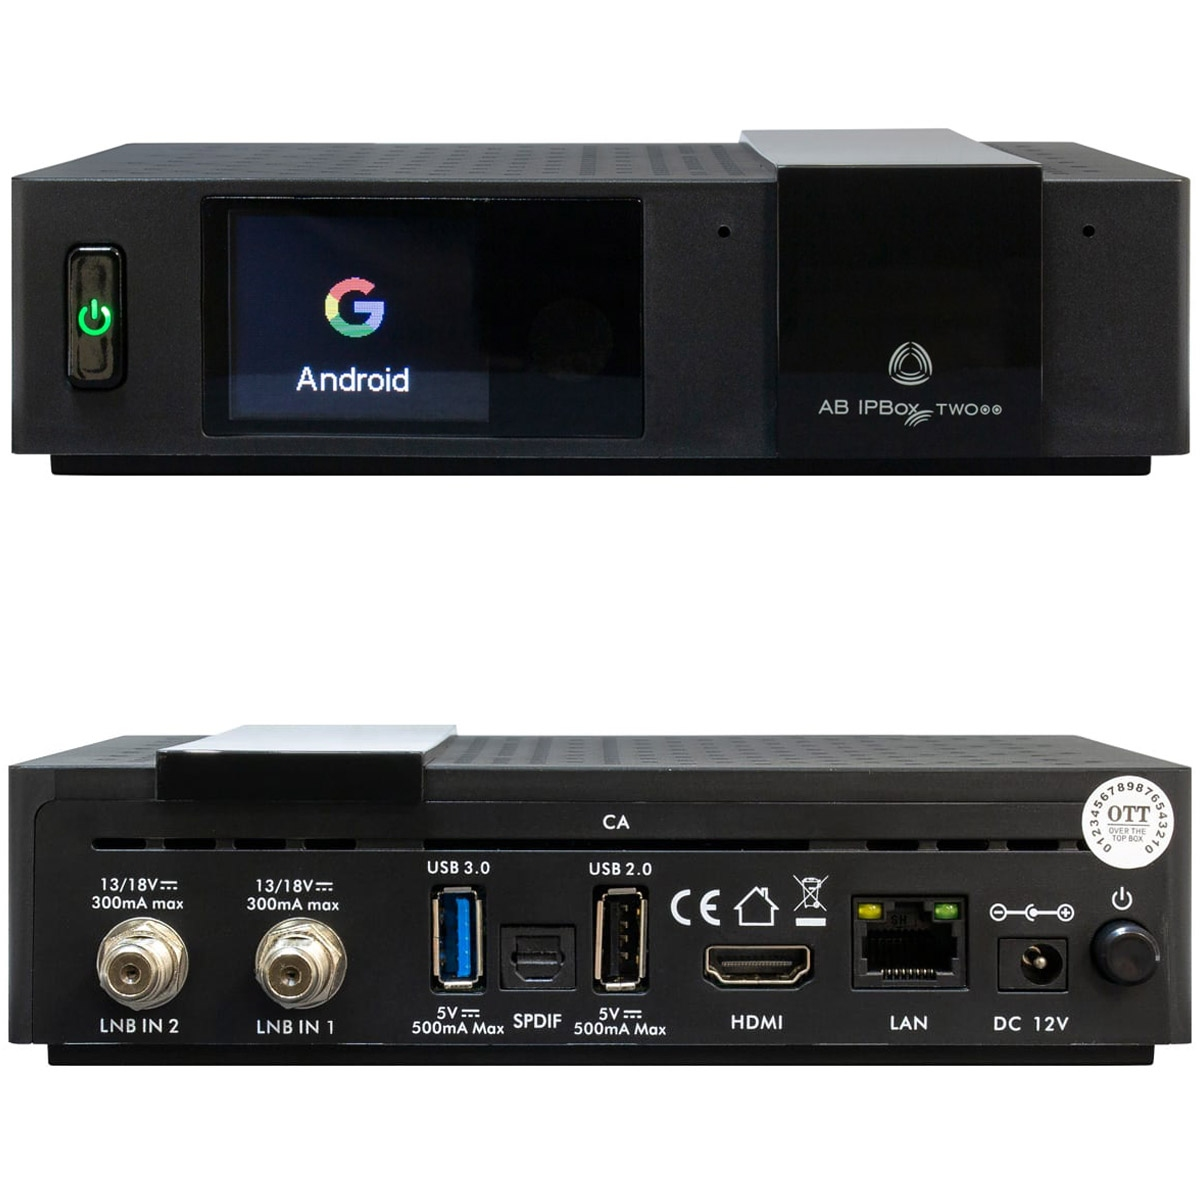 AB-COM IPBox TWO IP-Receiver PVR-Funktion=optional, Schwarz) Twin Twin Tuner, (HDTV, Receiver DVB-S2